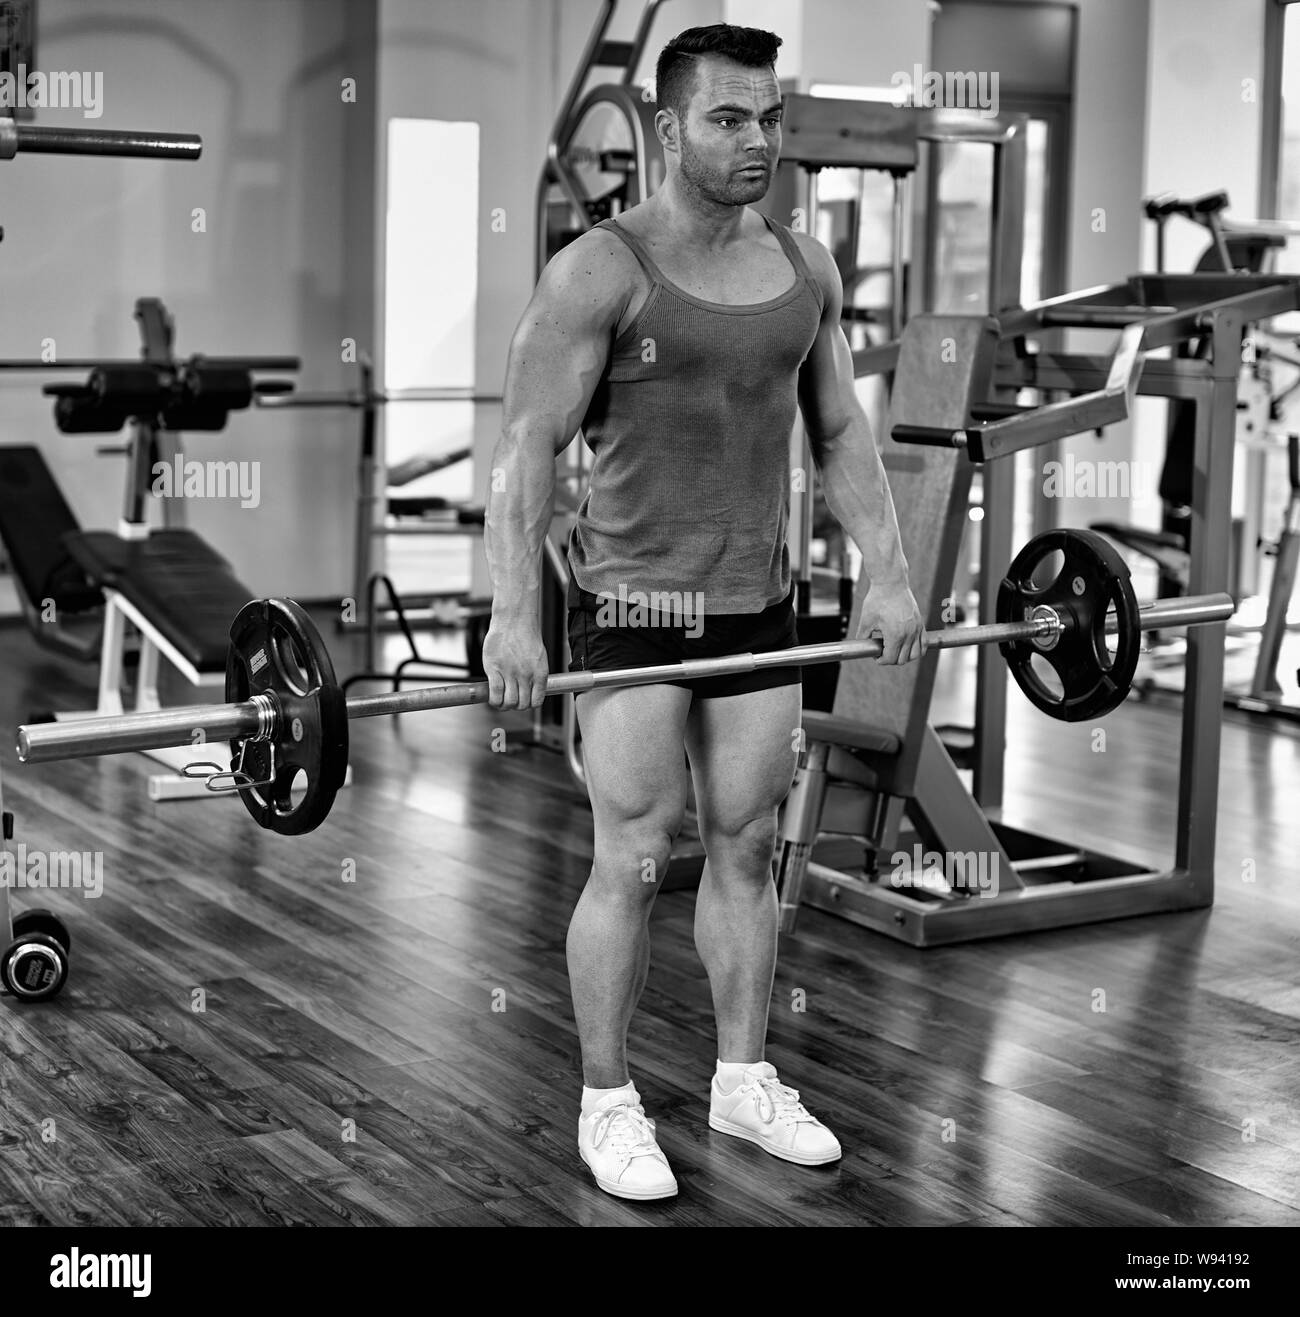 Man doing deadlifts with a barbell in a gym Stock Photo